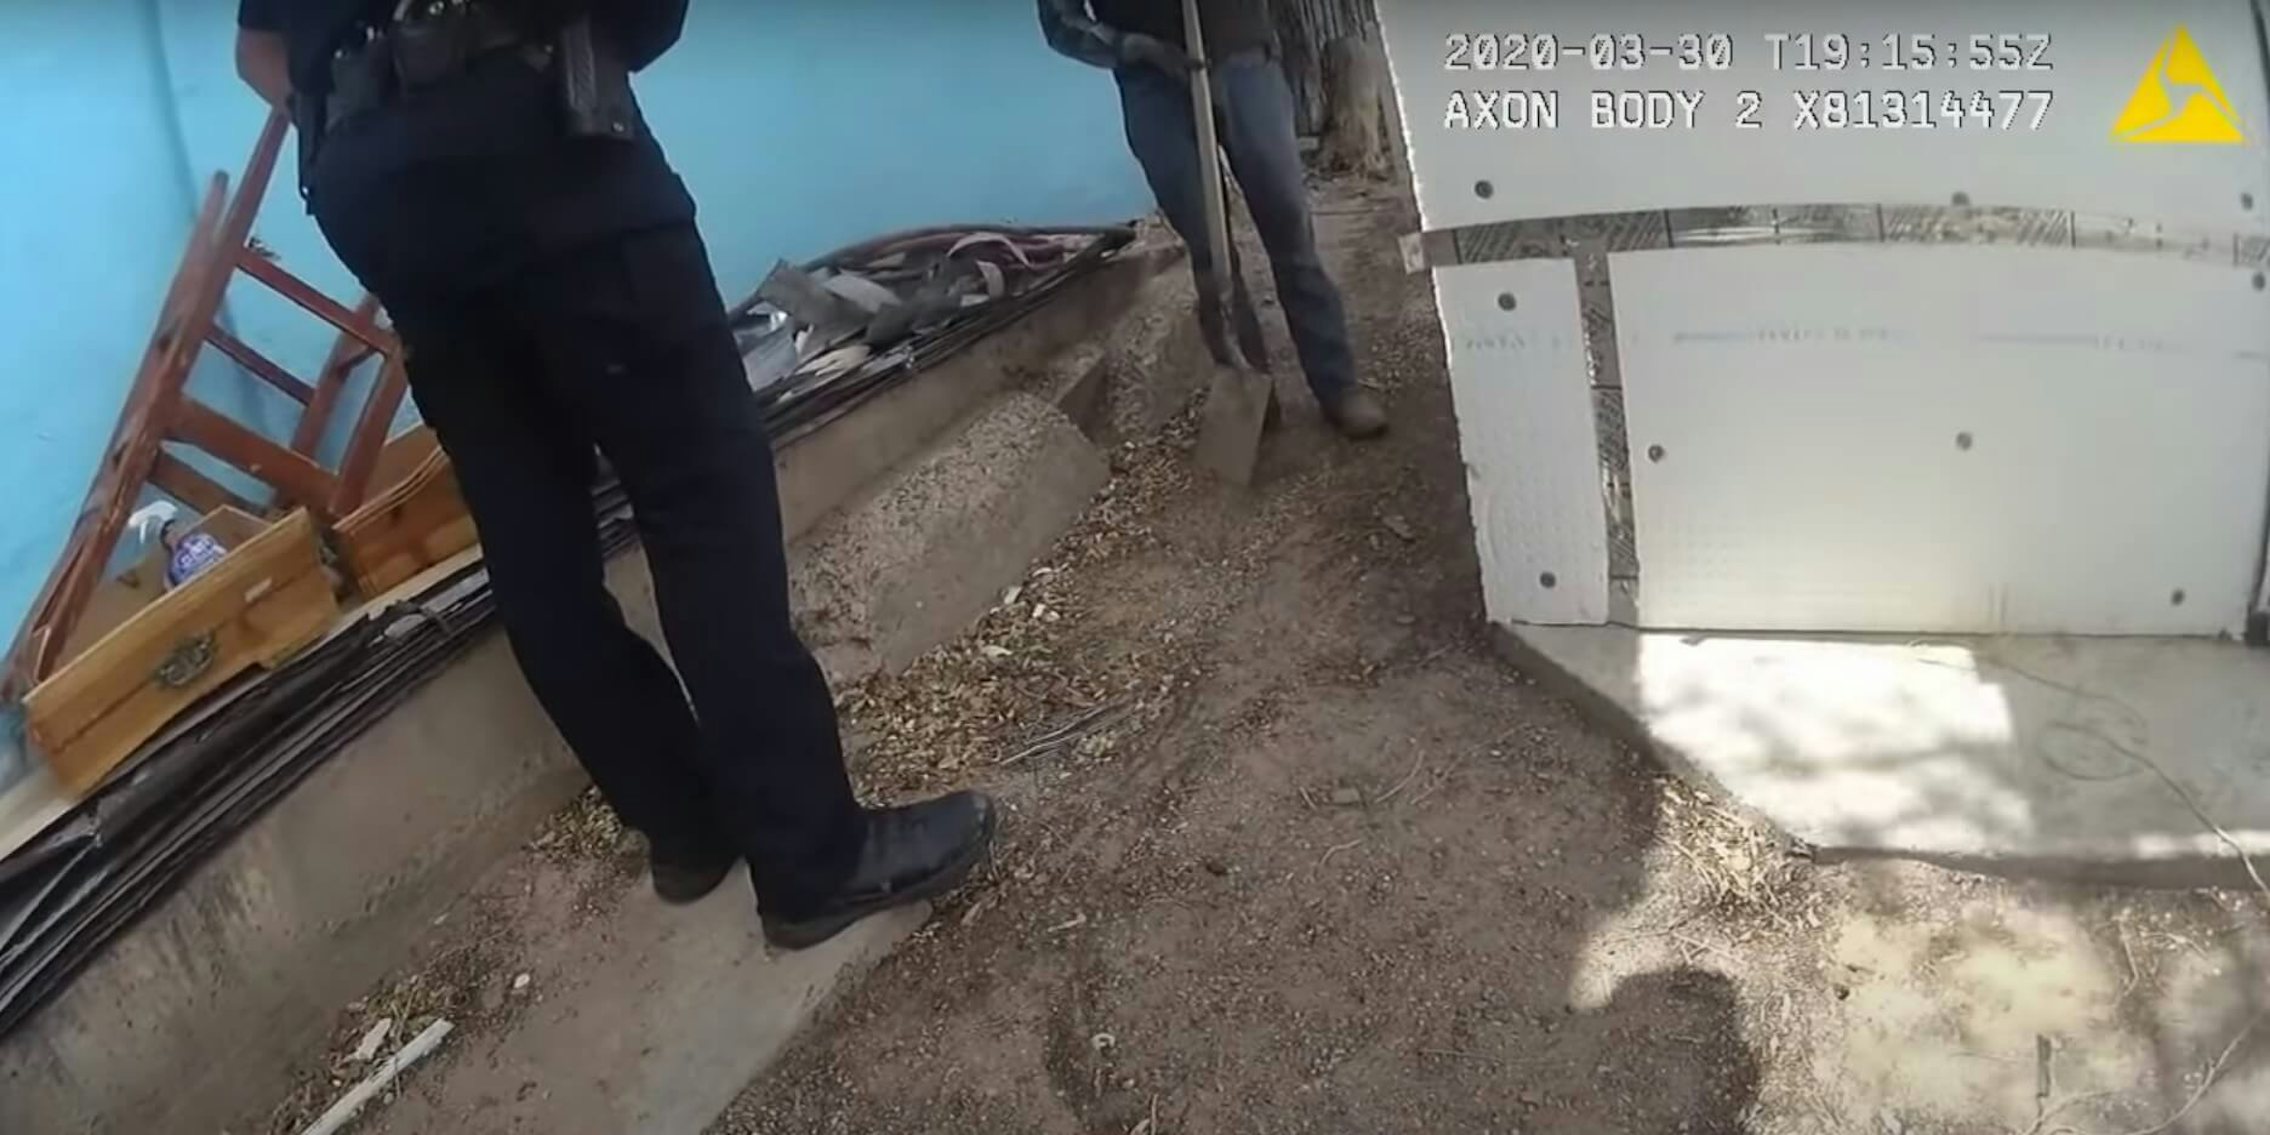 Bodycam footage shows officer Sandoval in conversation with Valente Acosta-Bustillos, who is holding a shovel